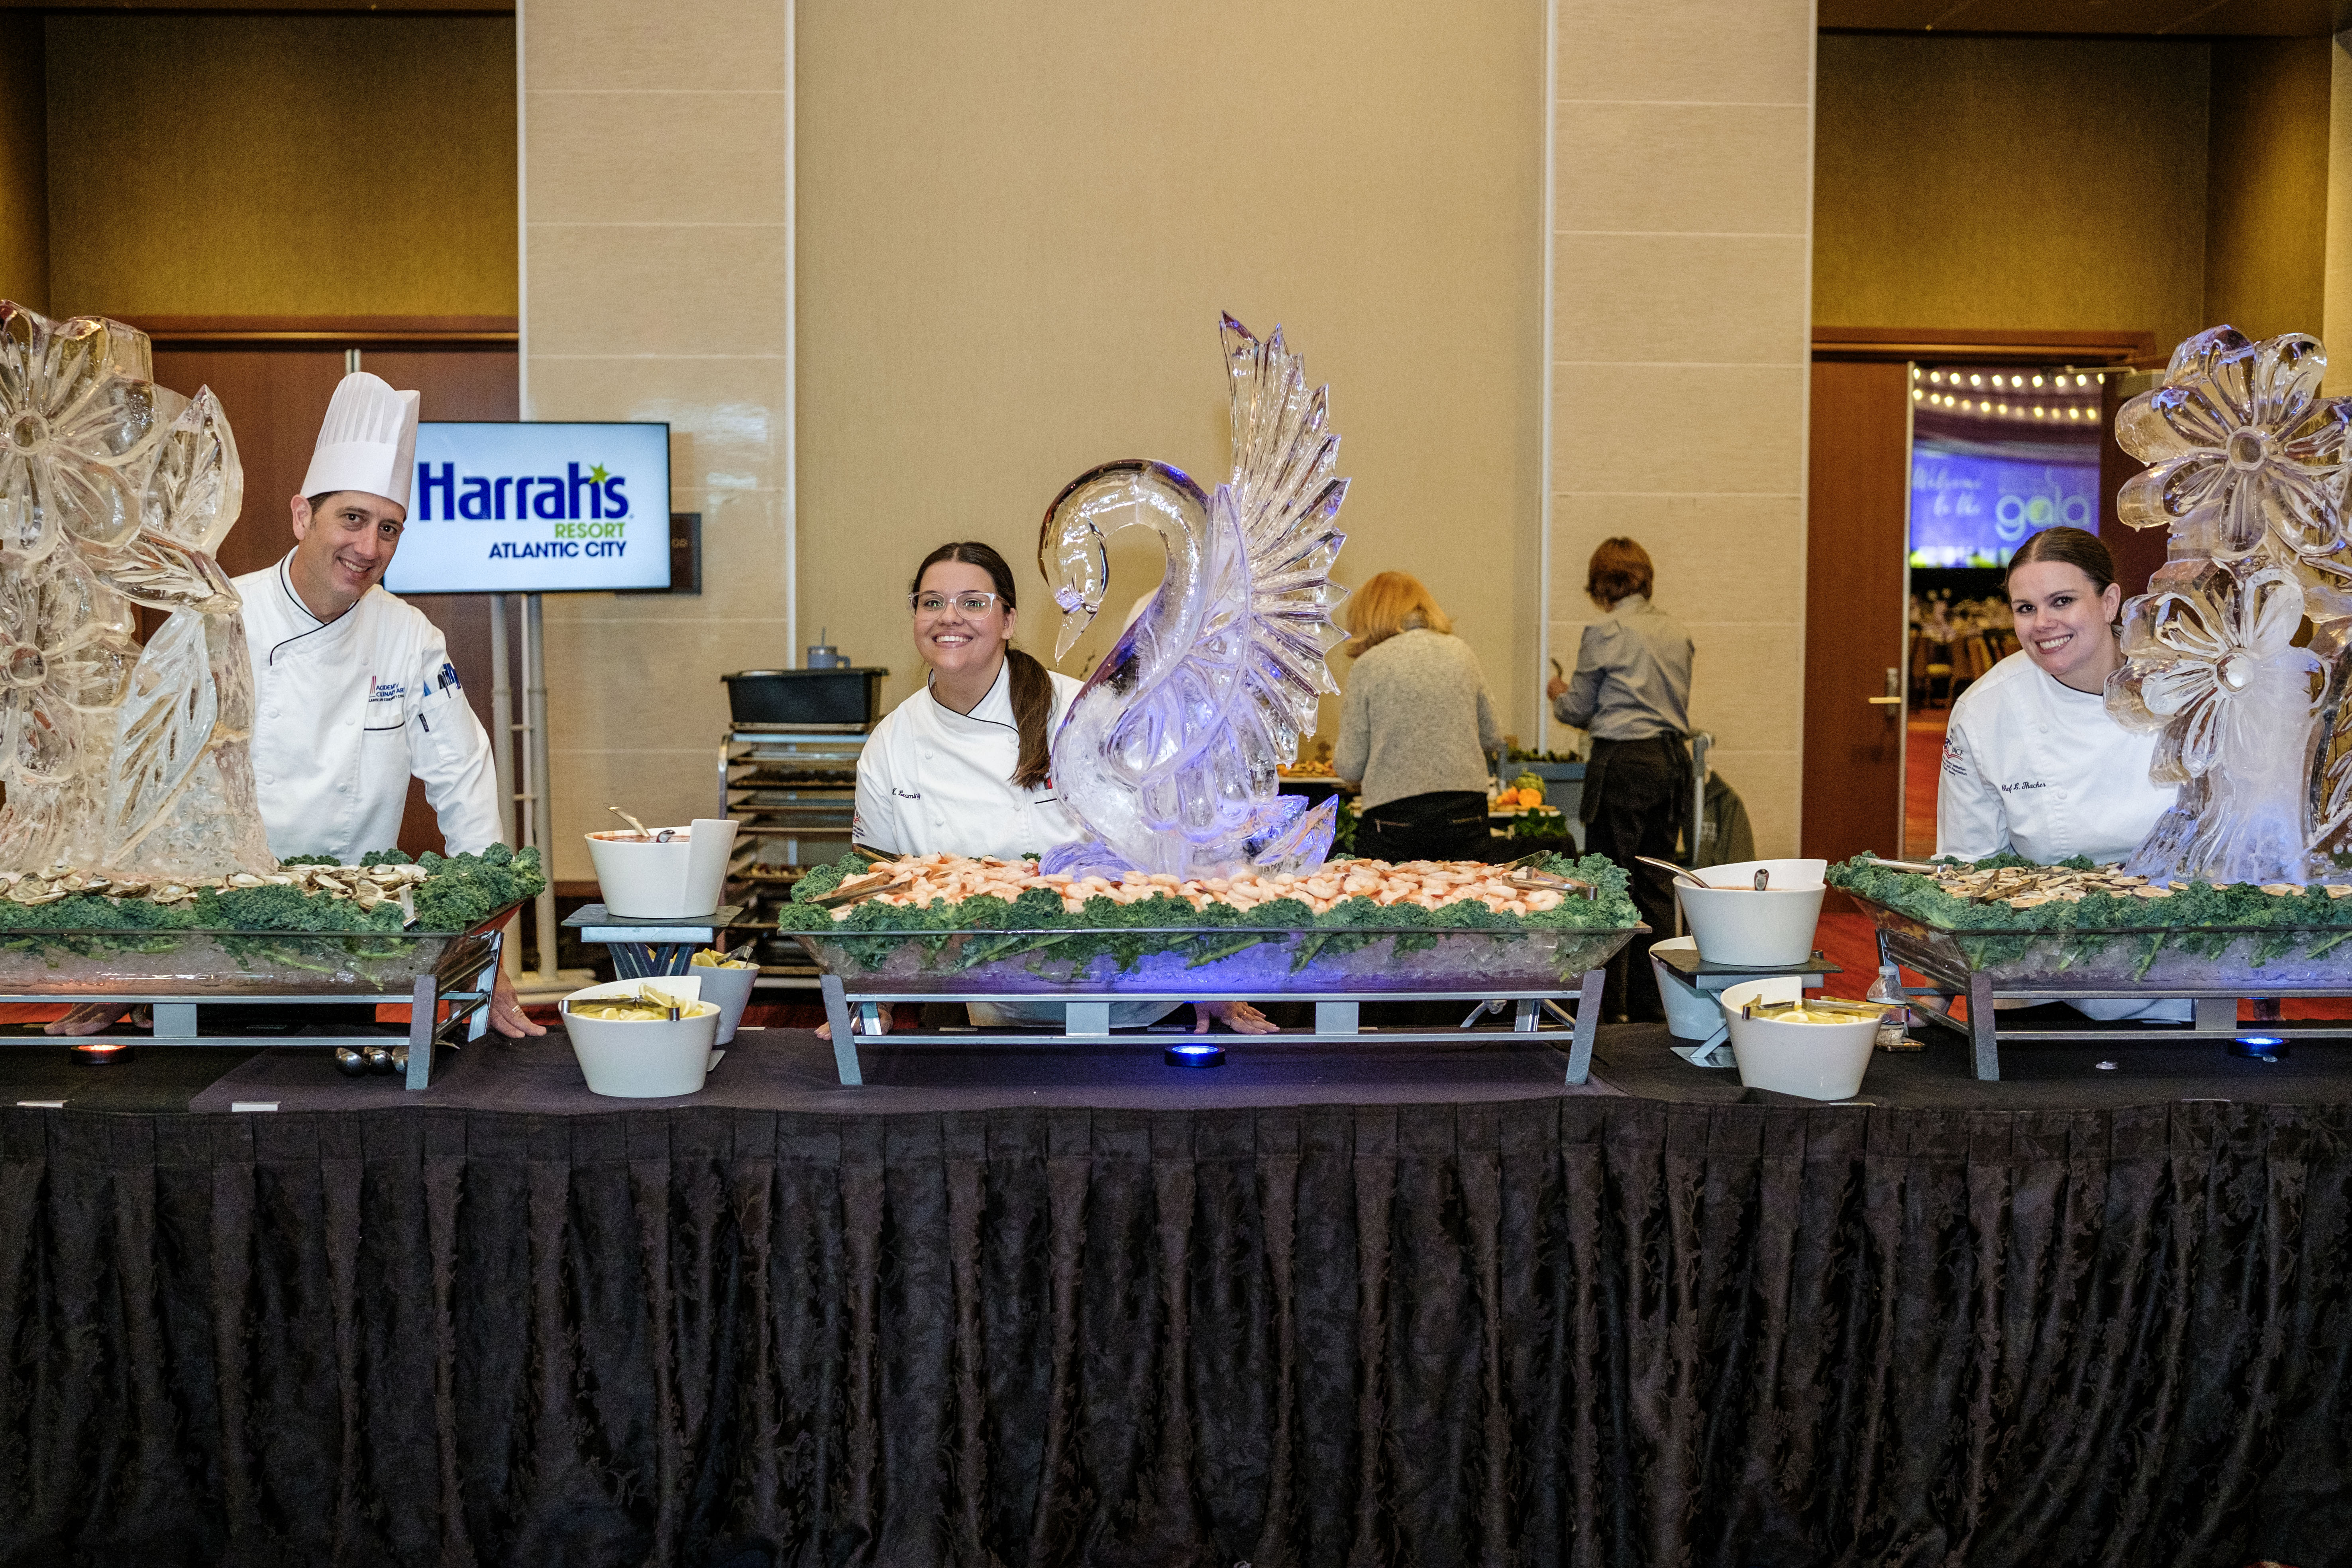 Students from the Academy of Culinary Arts during the Gala cocktail hour